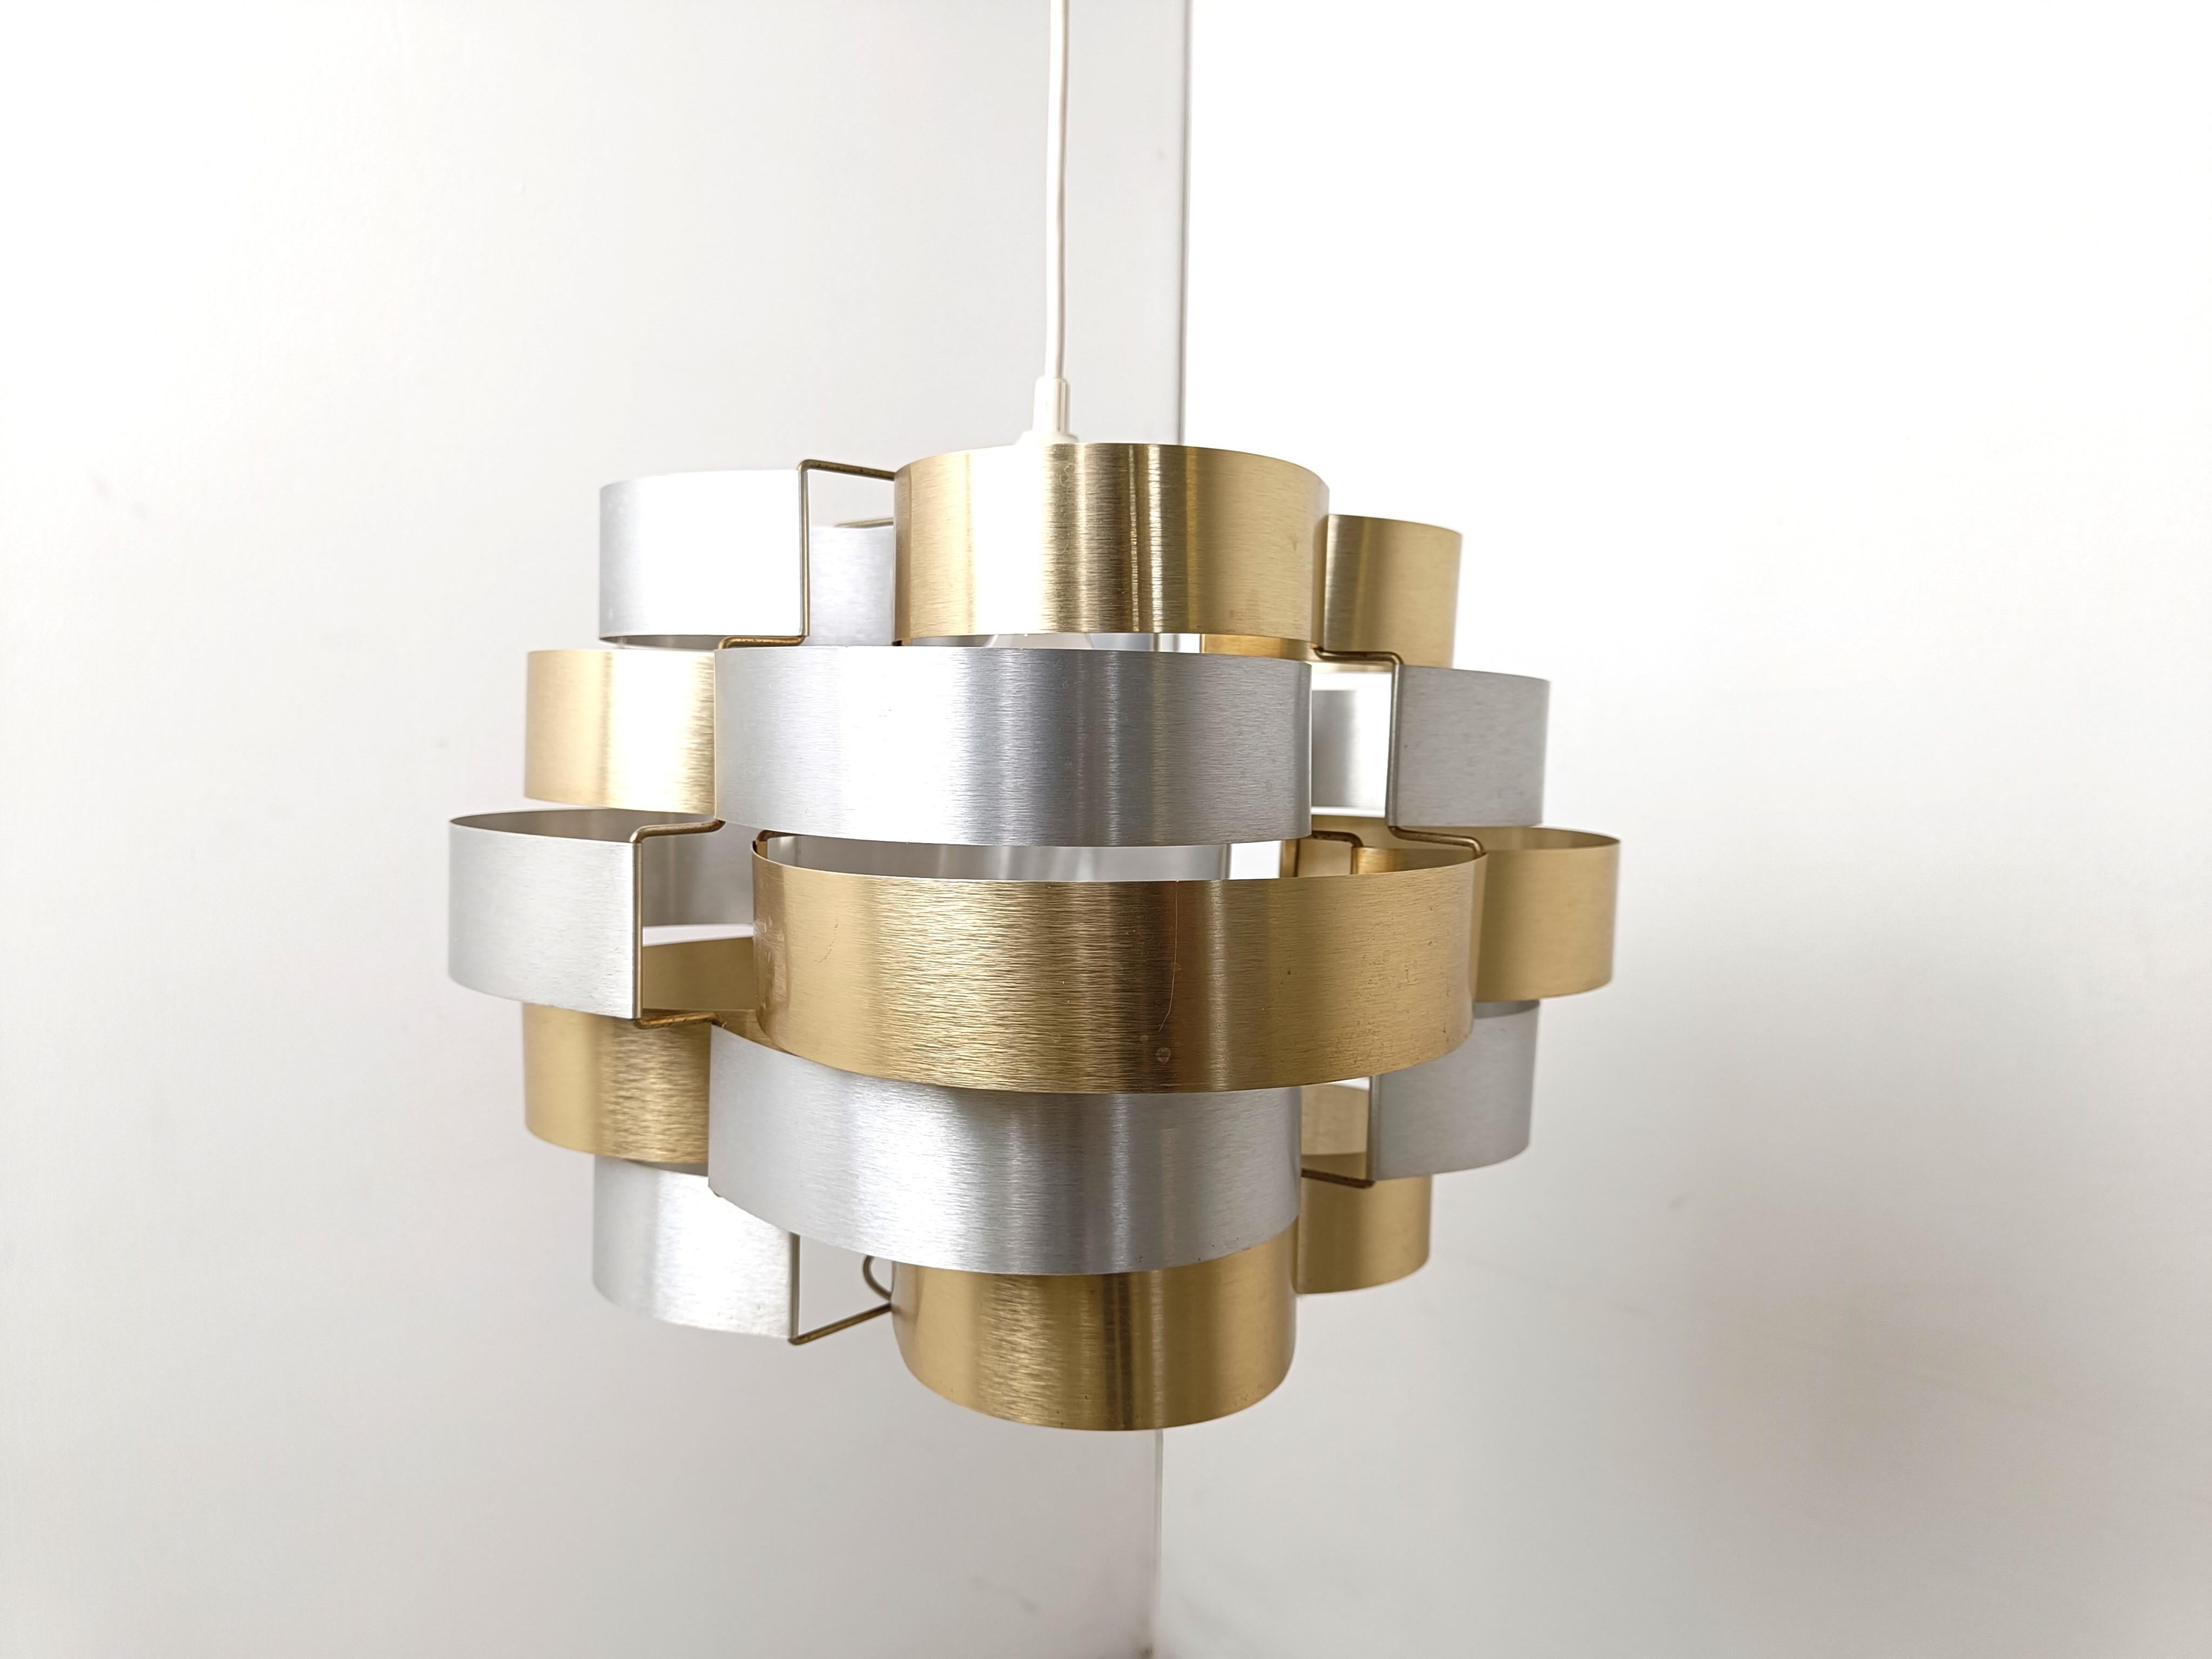 Space age pendant light with bent aluminum strips in silver and gold.

Designed by Max Sauze.

The light takes one E27 light bulb.

1960s - France

Good condition

Dimensions:
Height without cord (cable lenght can be requested) 35cm
Diameter: